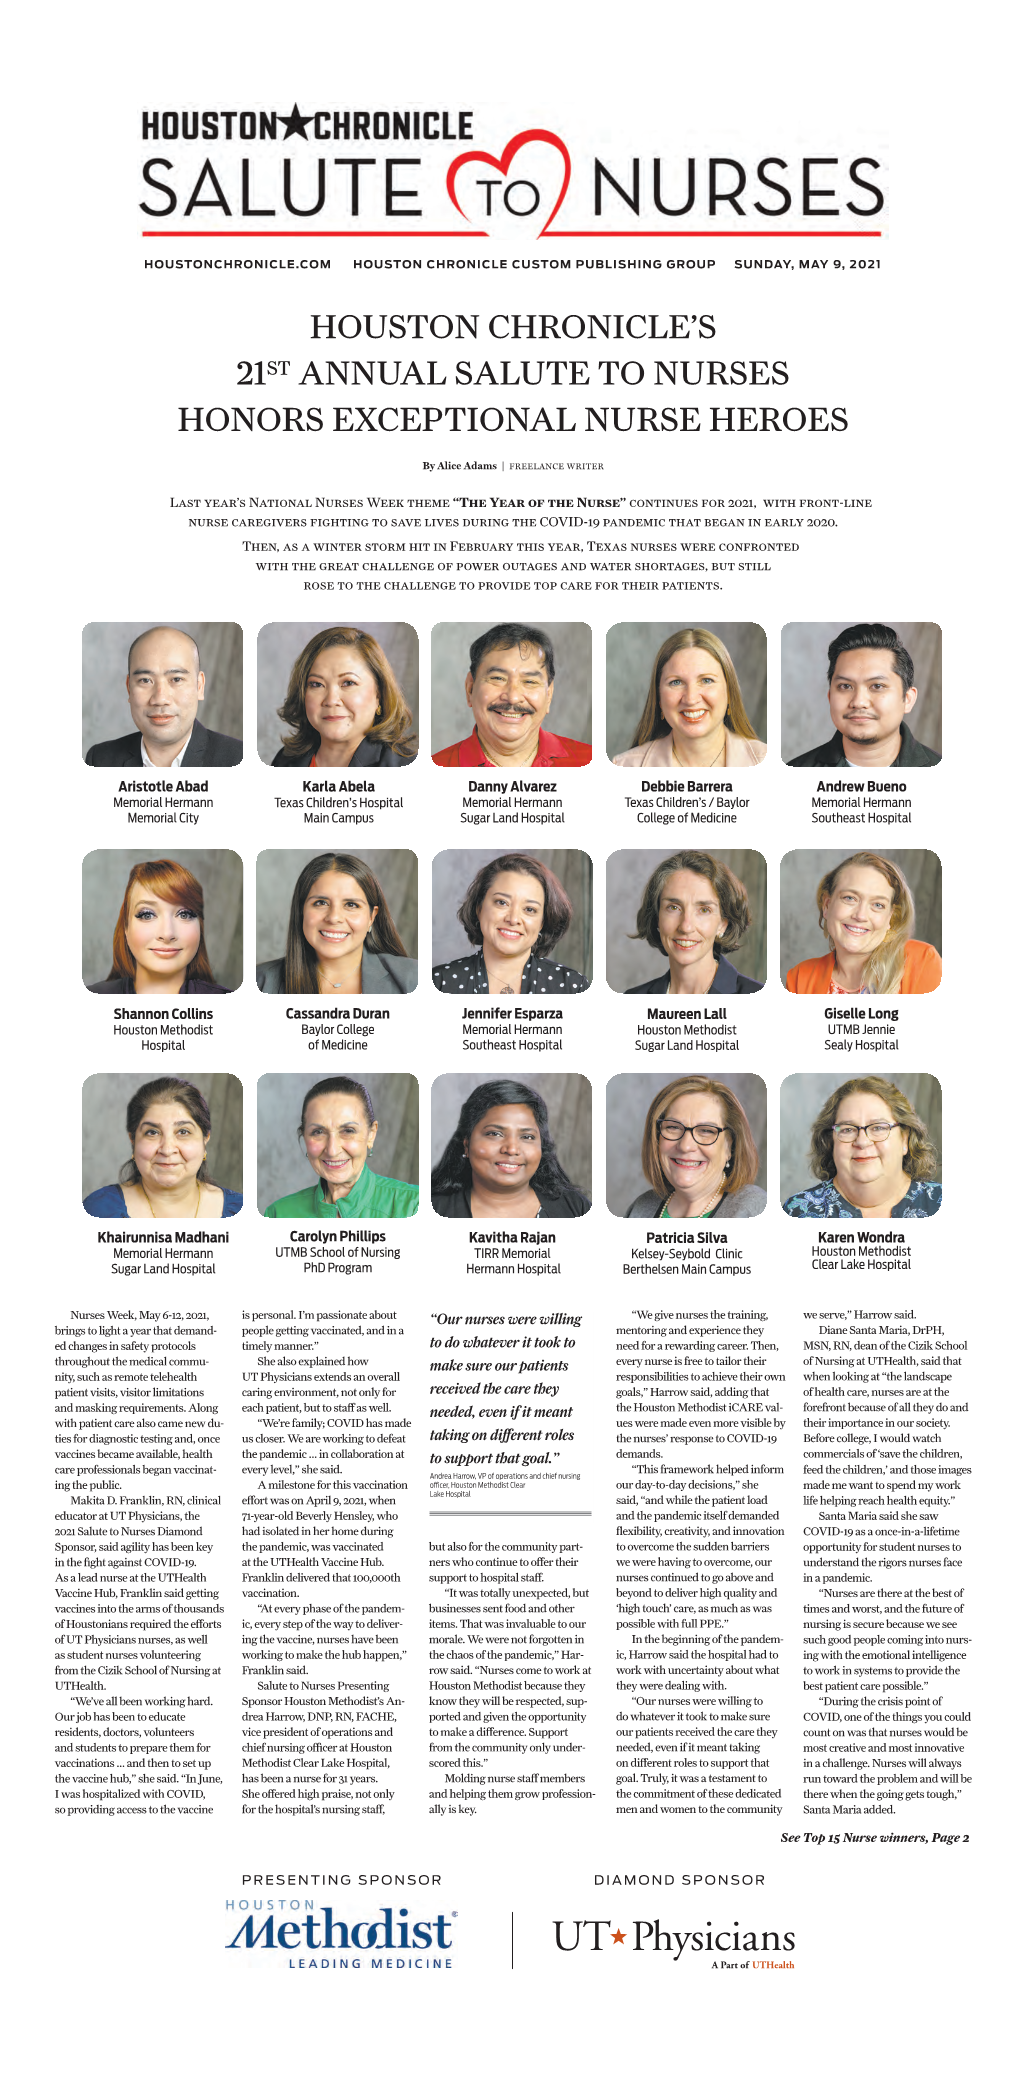 Houston Chronicle's 21St Annual Salute to Nurses Honors Exceptional Nurse